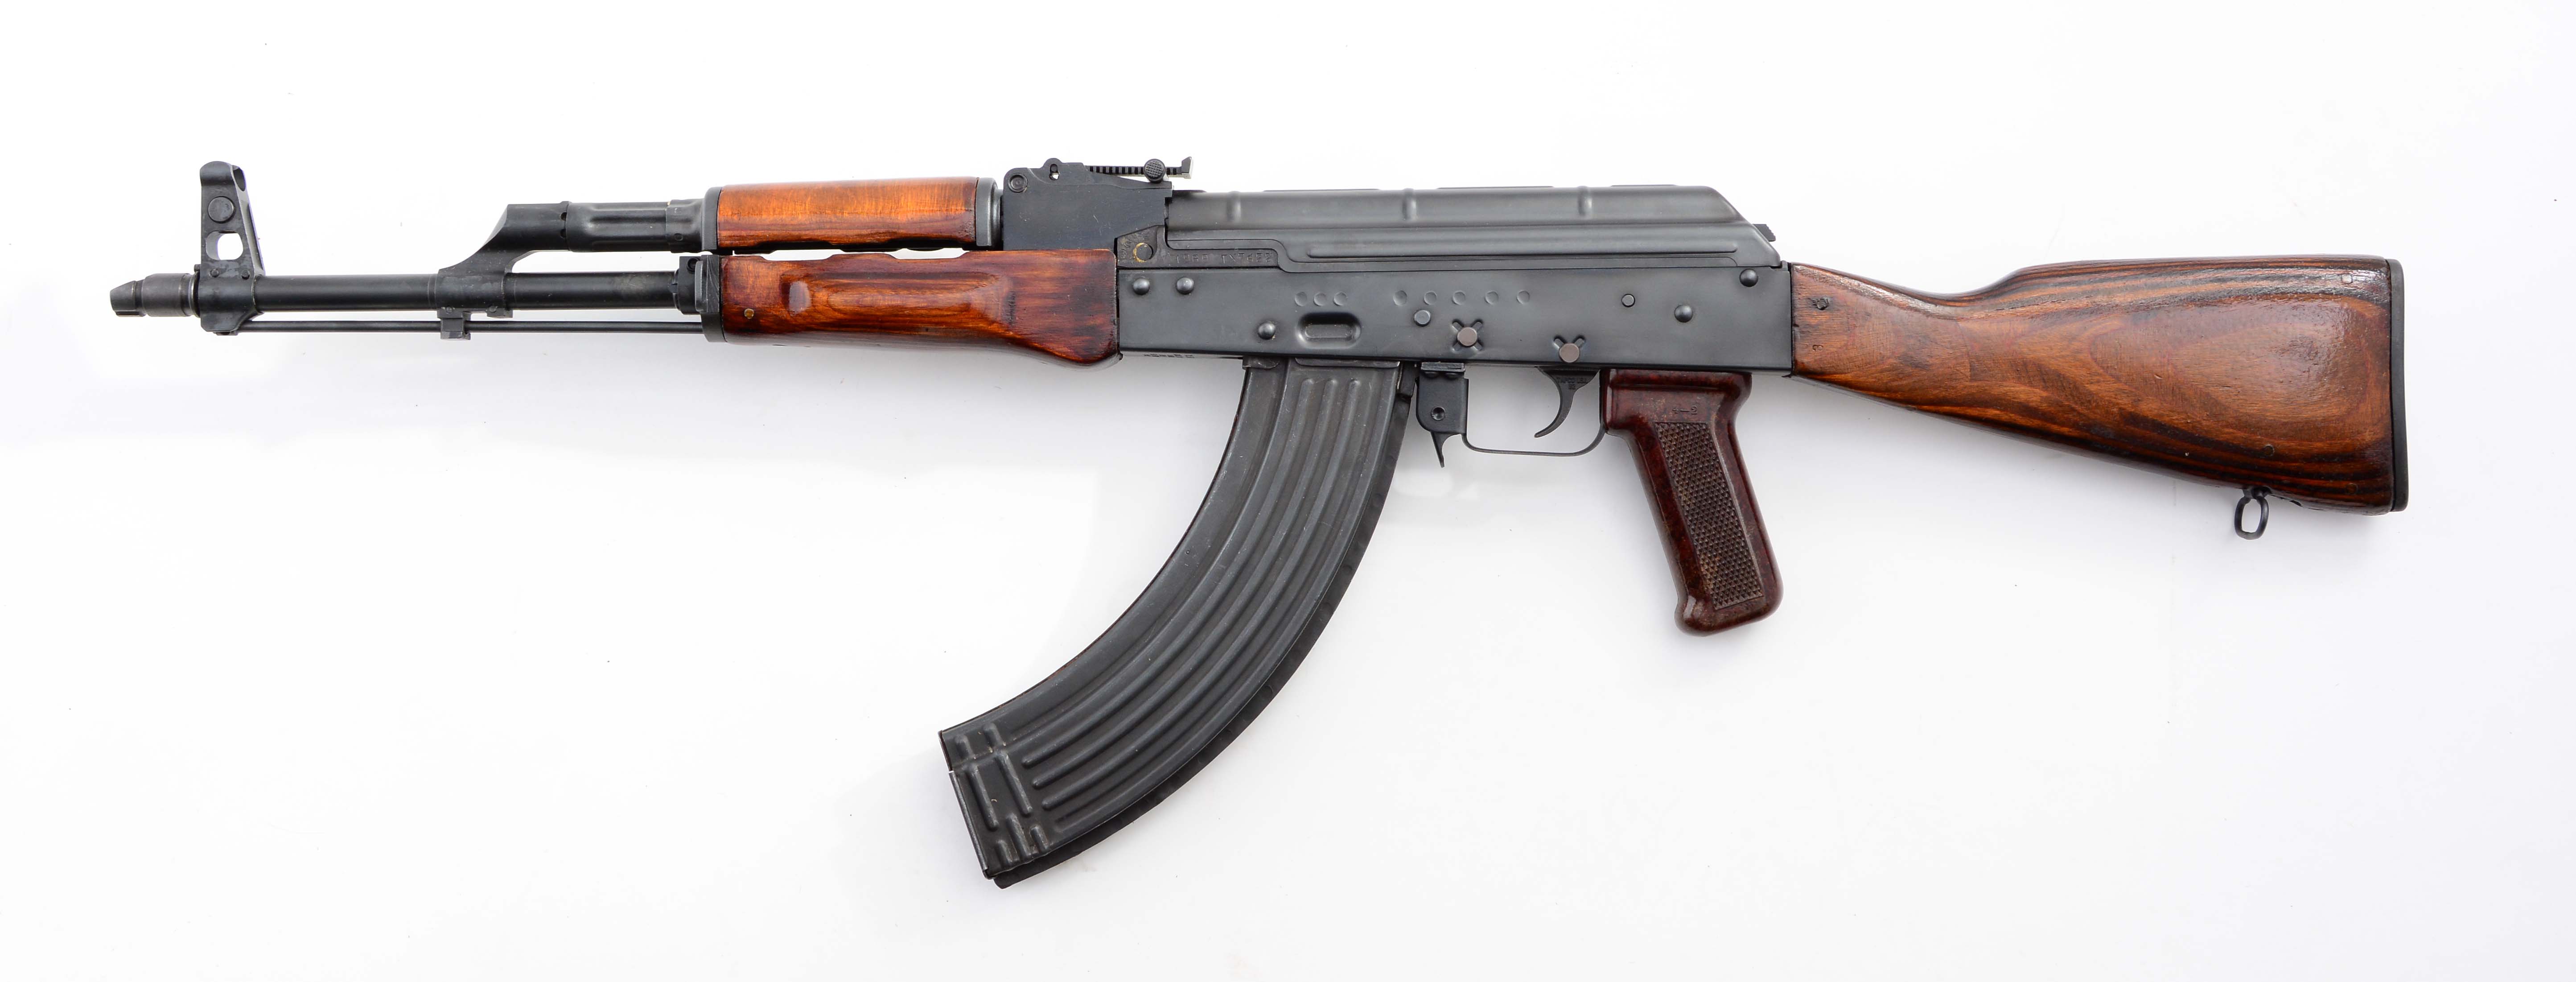 fully automatic ak 47 for sale